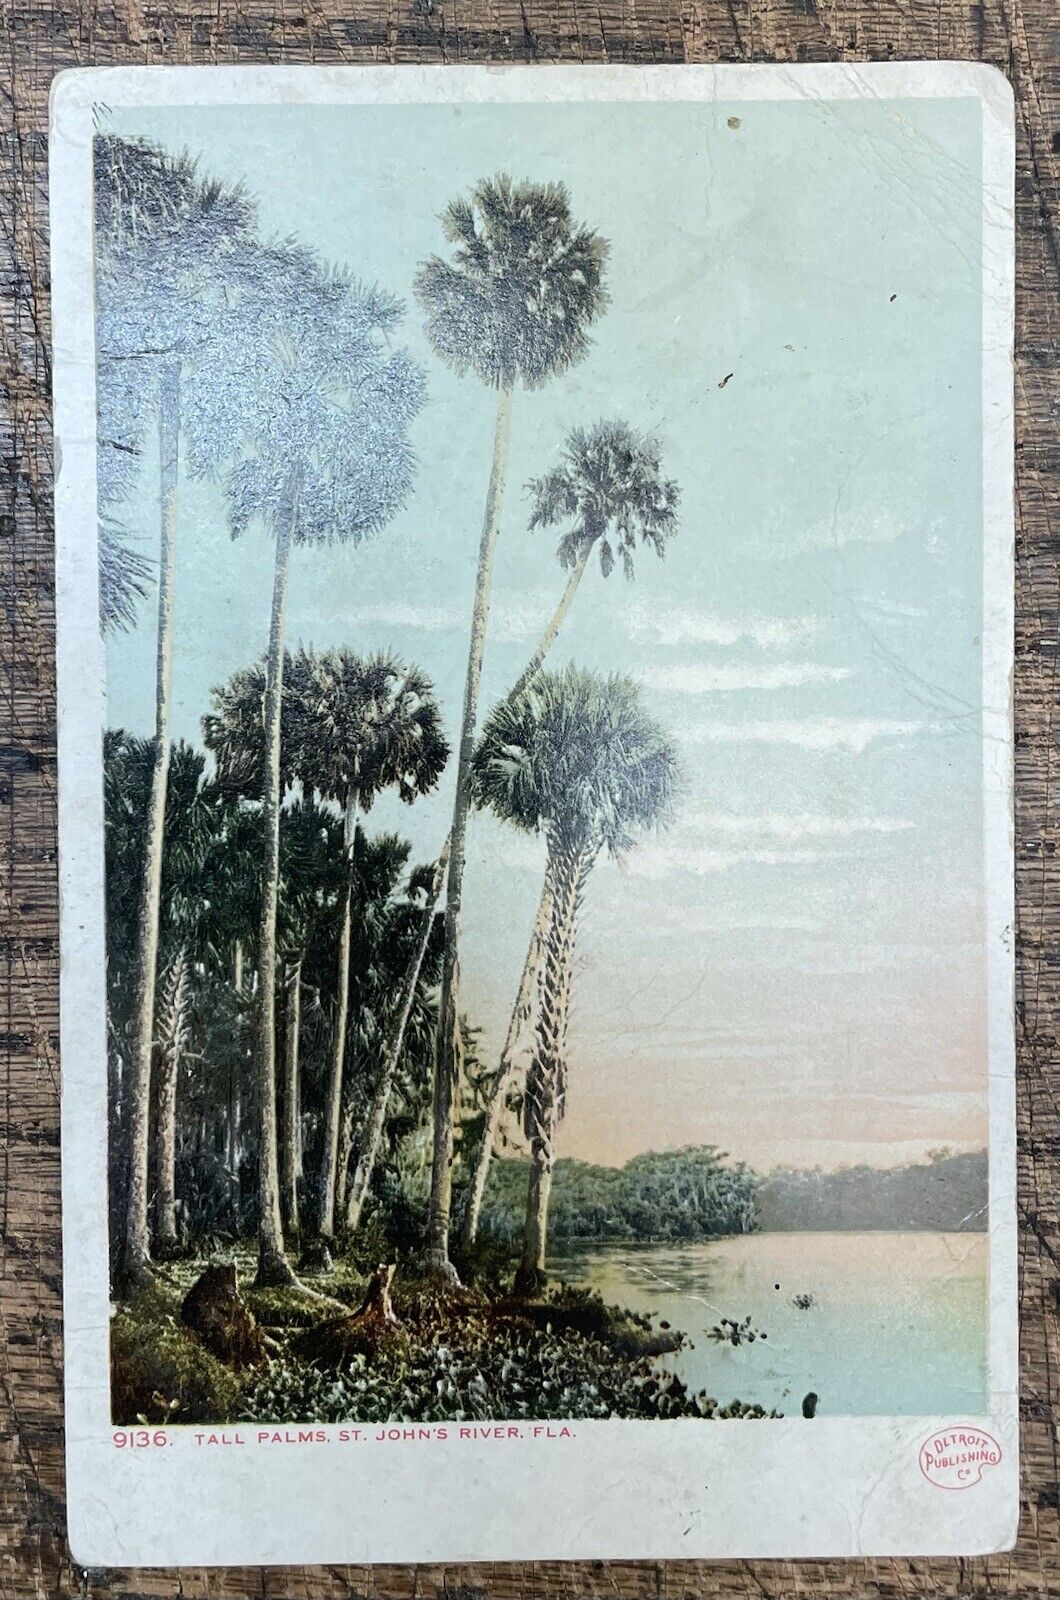 1908 Color Postcard, Palm Trees, St. John’s River, Fl, mailed to Sugar Ridge, Oh